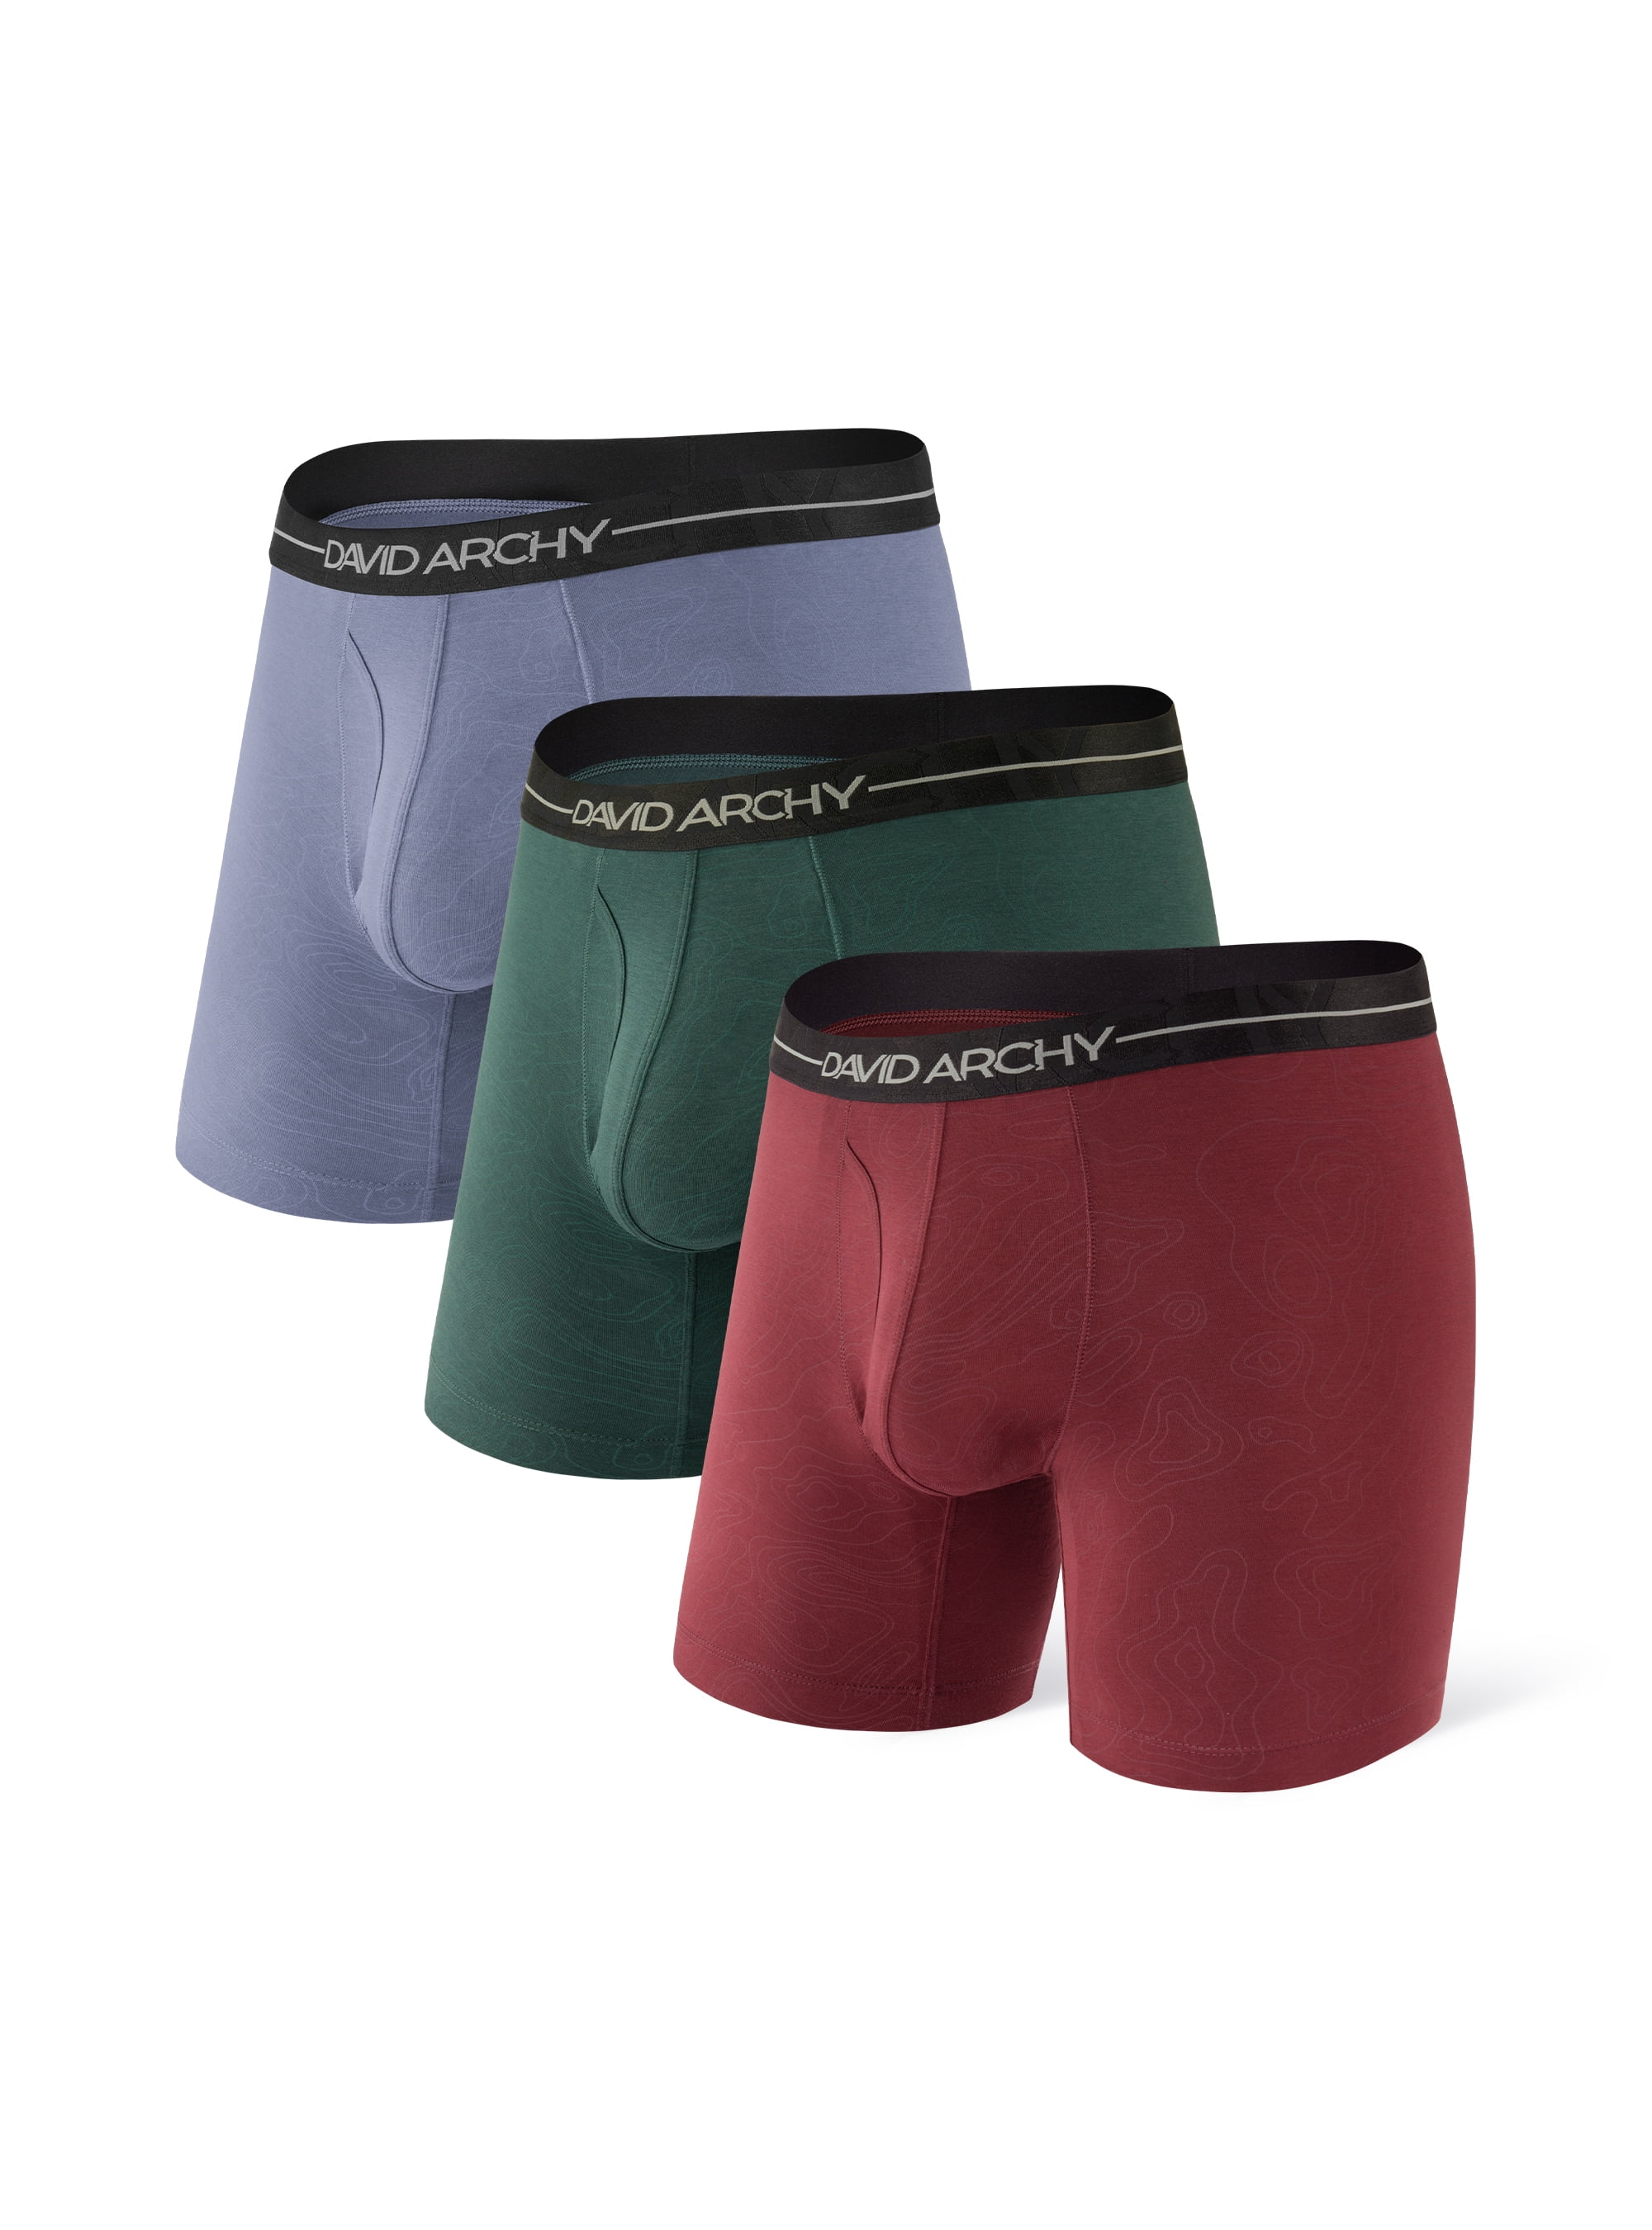 DAVID ARCHY Adult Men's Underwear Ultra Soft Micro Modal Boxer Briefs  Assorted 3 Pack,Sizes S-XL 